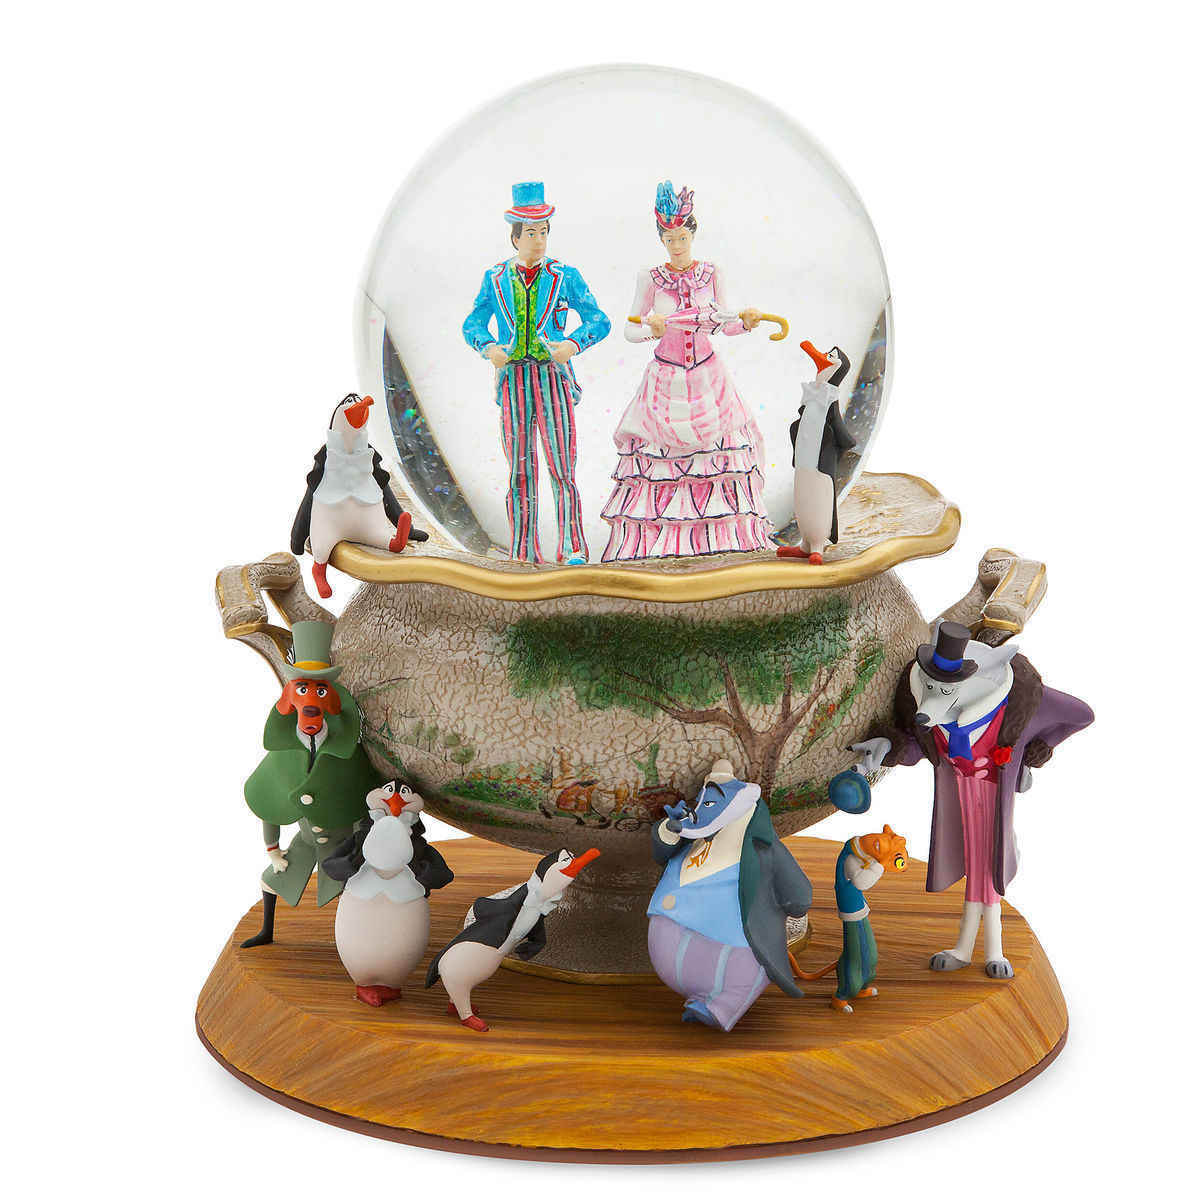 Primary image for Sold AZ 2/7/23 Disney Store Mary Poppins Returns Snowglobe 2018 Limited Edition 